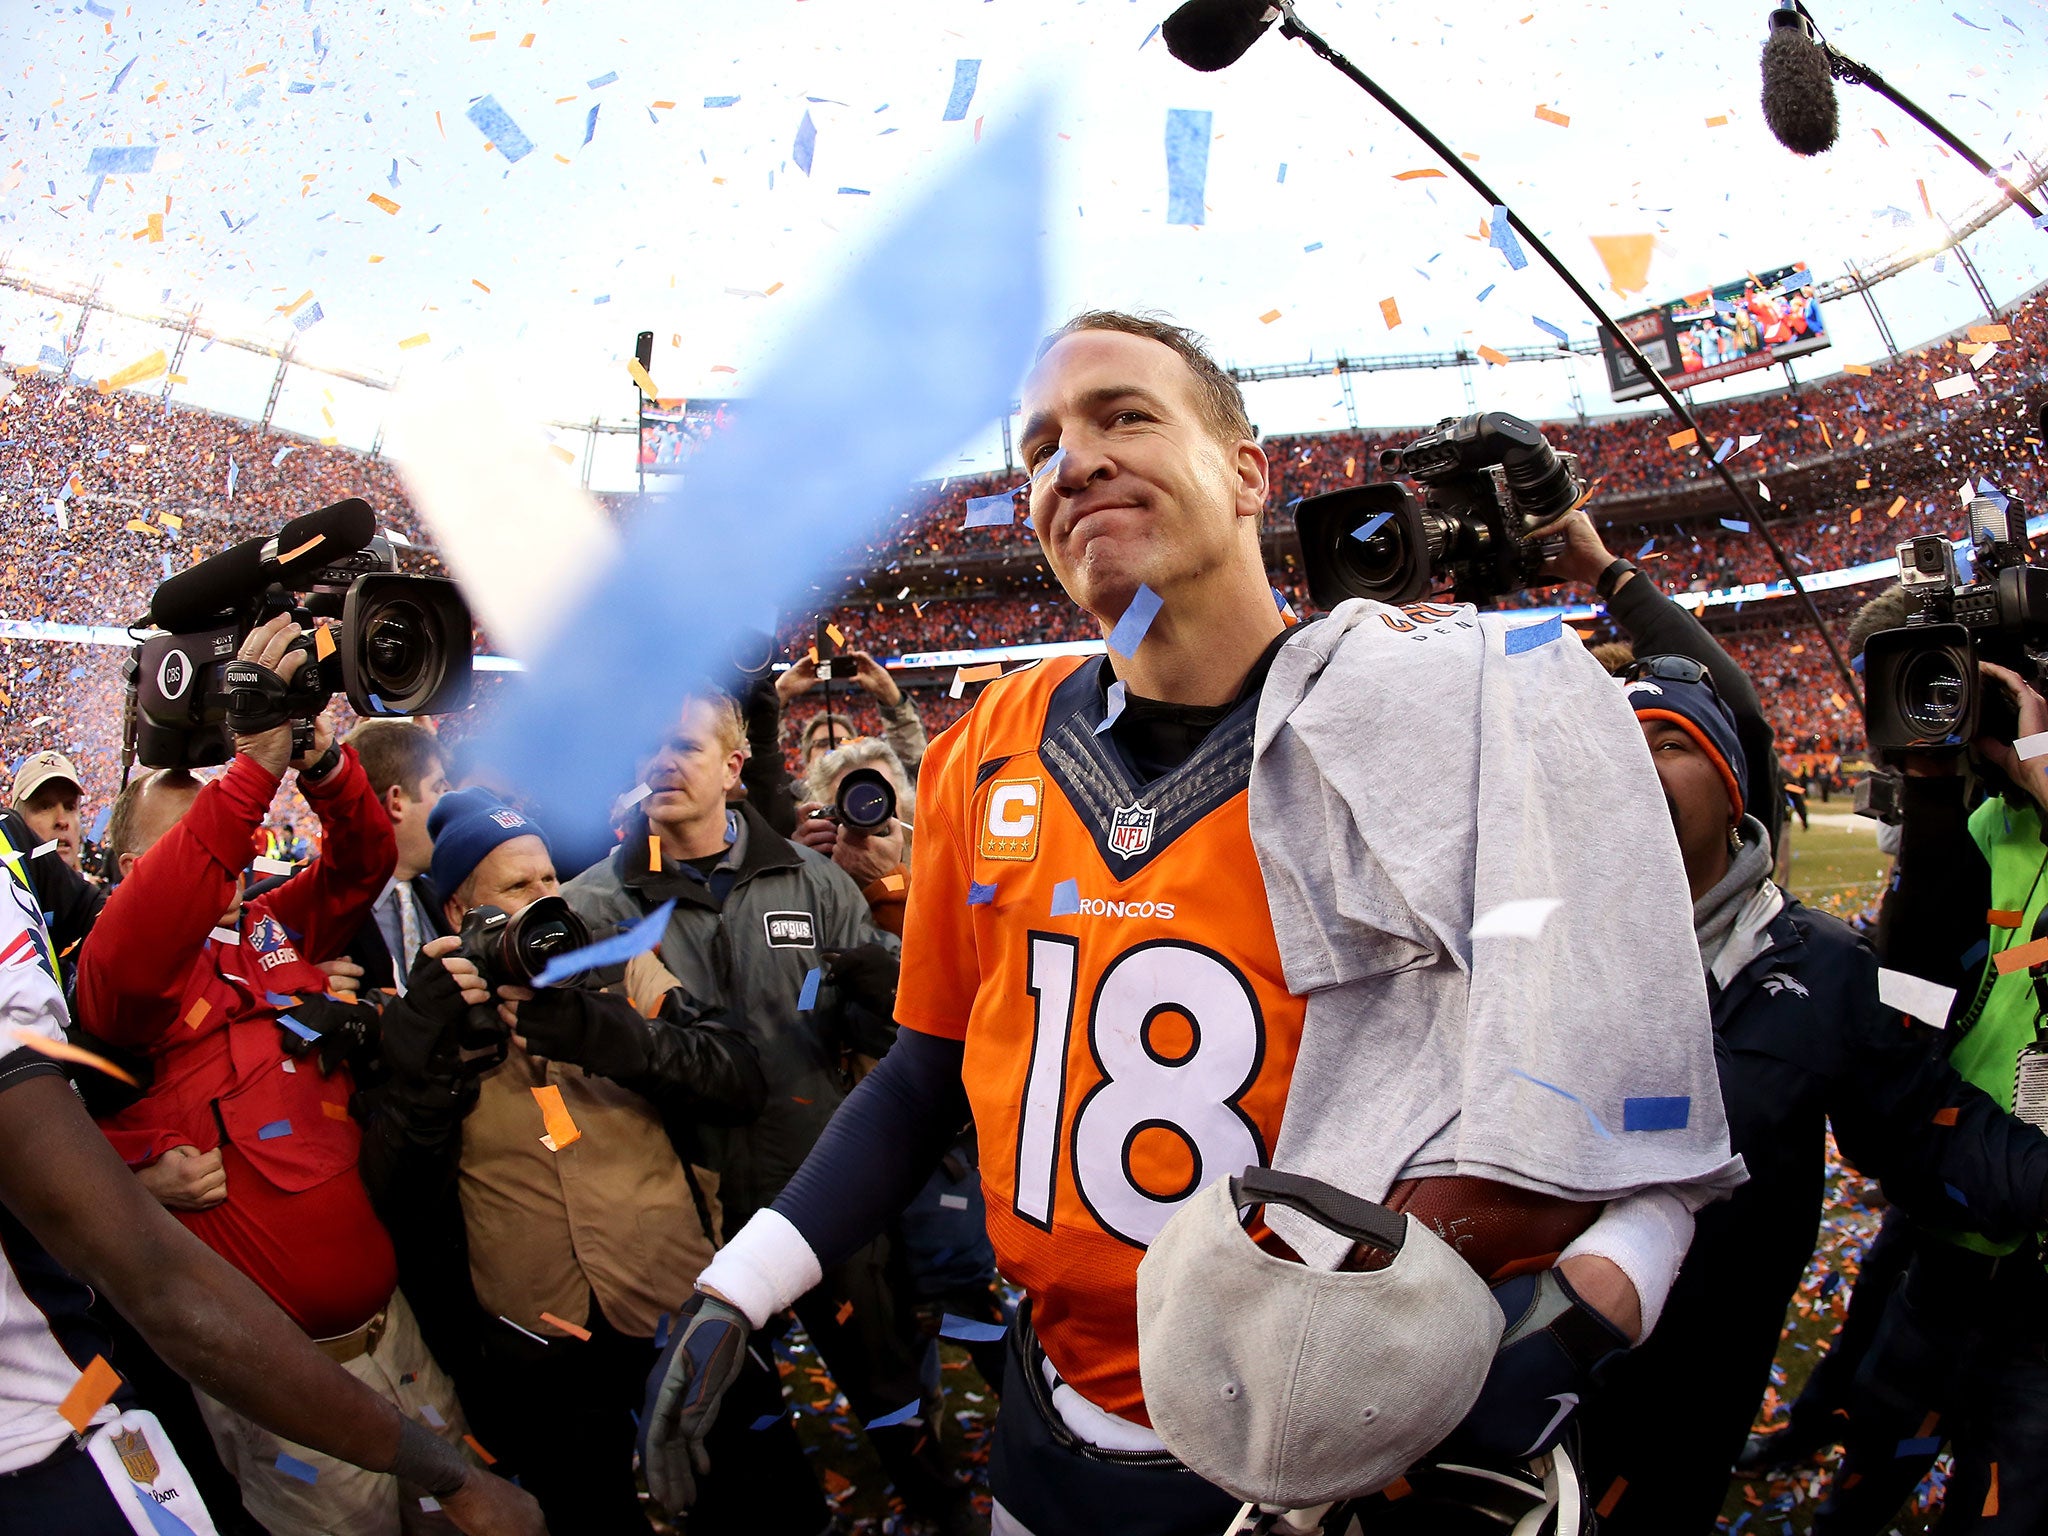 Peyton Manning of the Denver Broncos celebrates after defeating the New England Patriots in the AFC Championship game